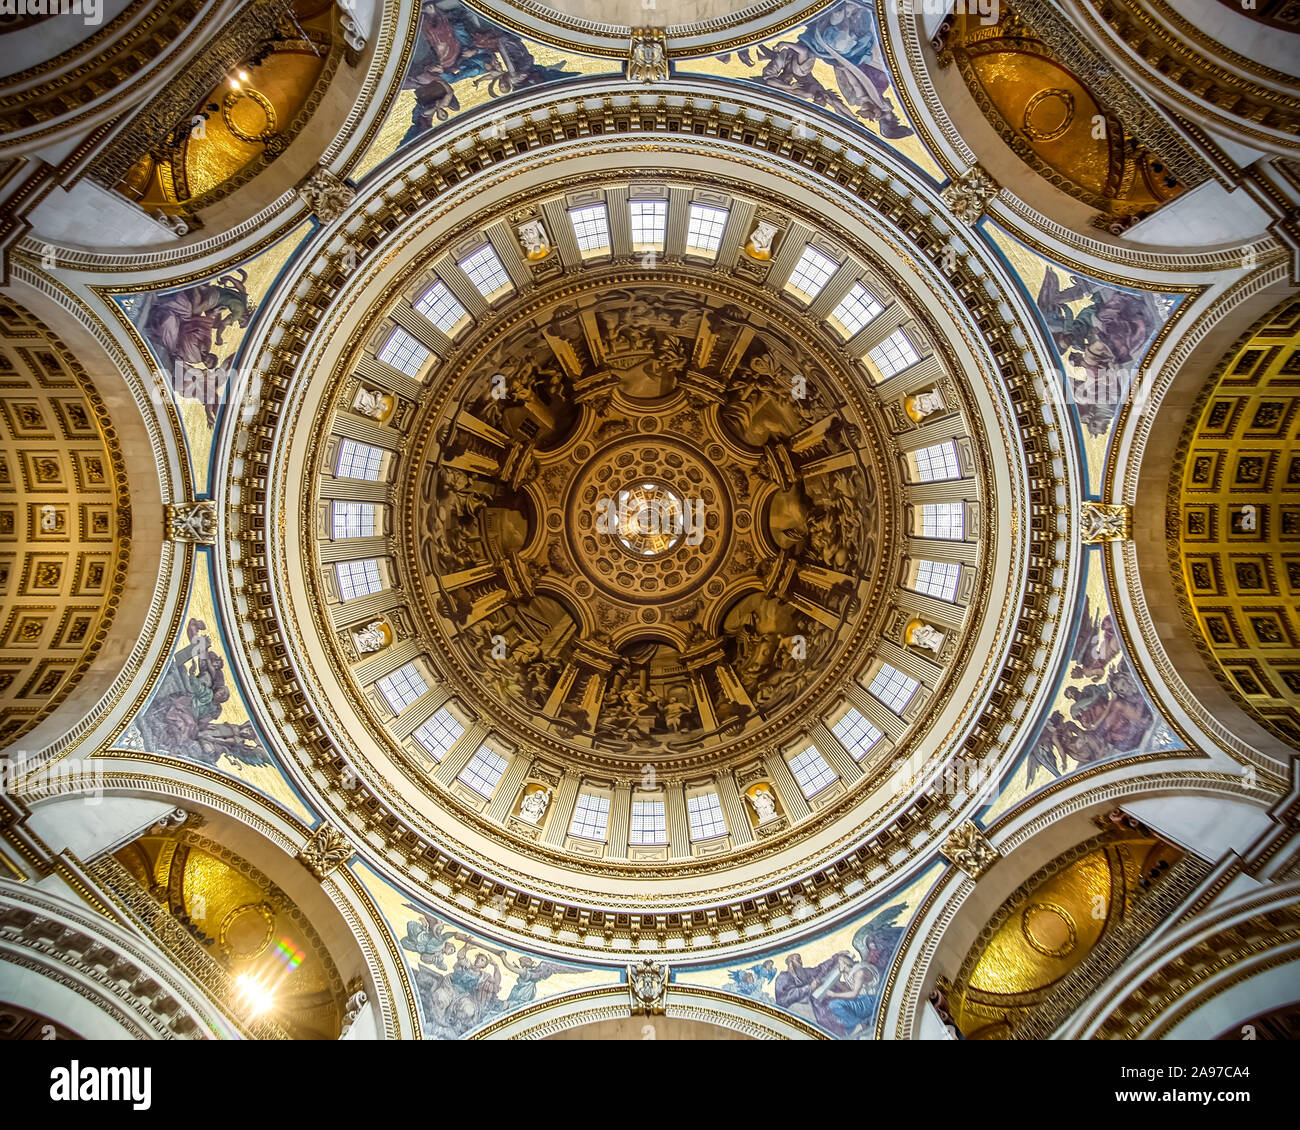 11.07.2019. London, UK, St Pauls Cathedral. Splendid inside of the St Paul catherdal. Amazing, altar, frescos and cupola Stock Photo